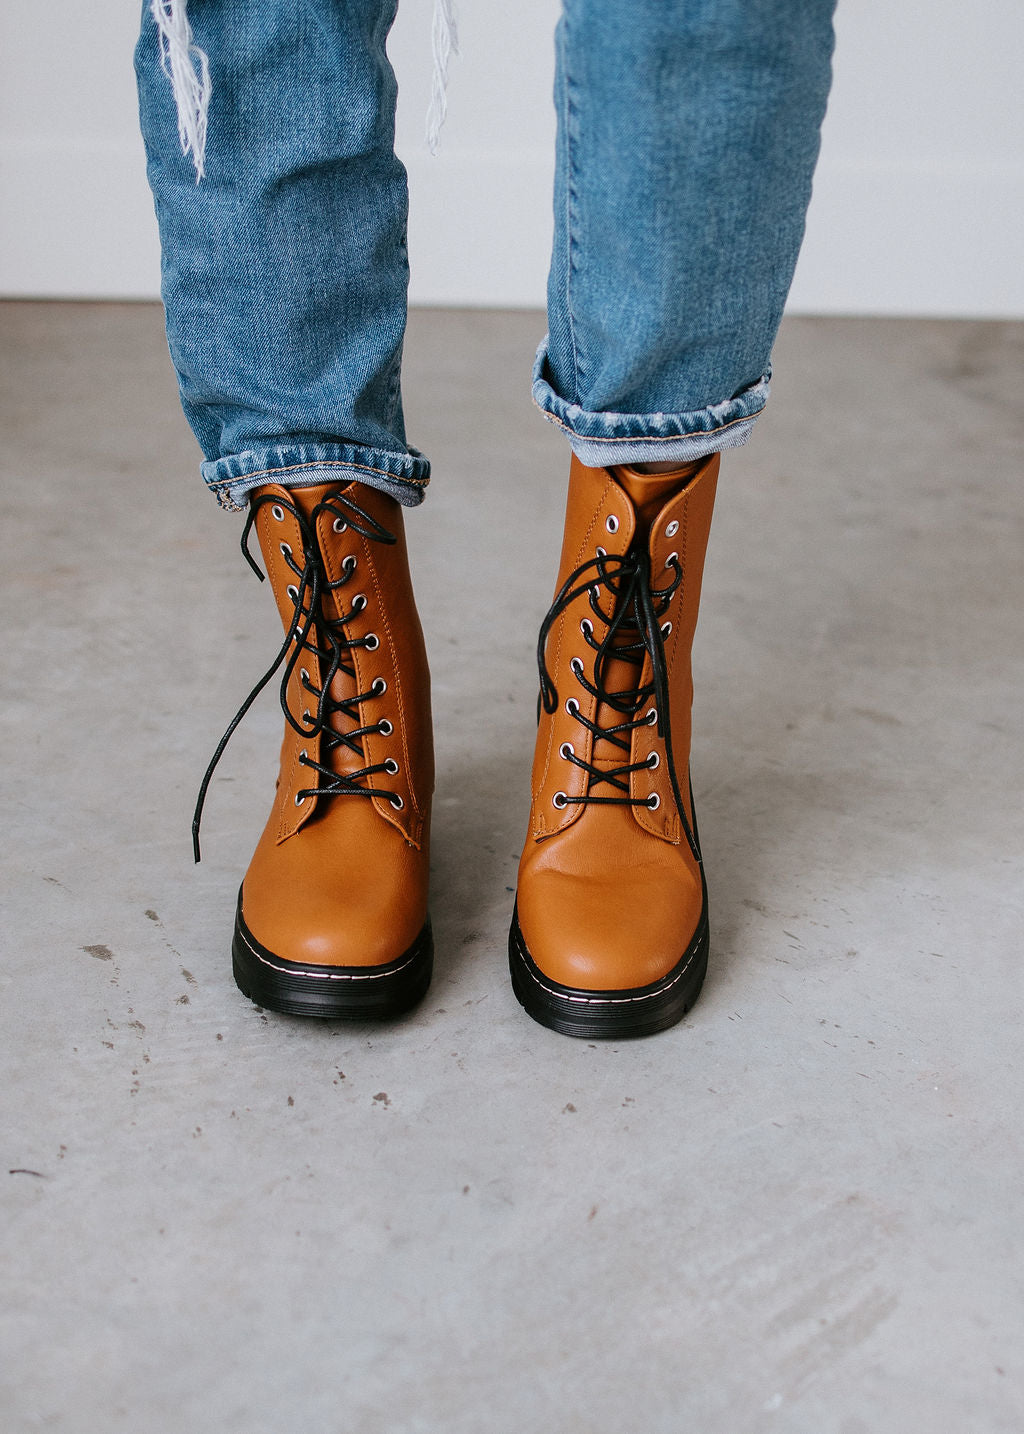 The Outcast Combat Boot